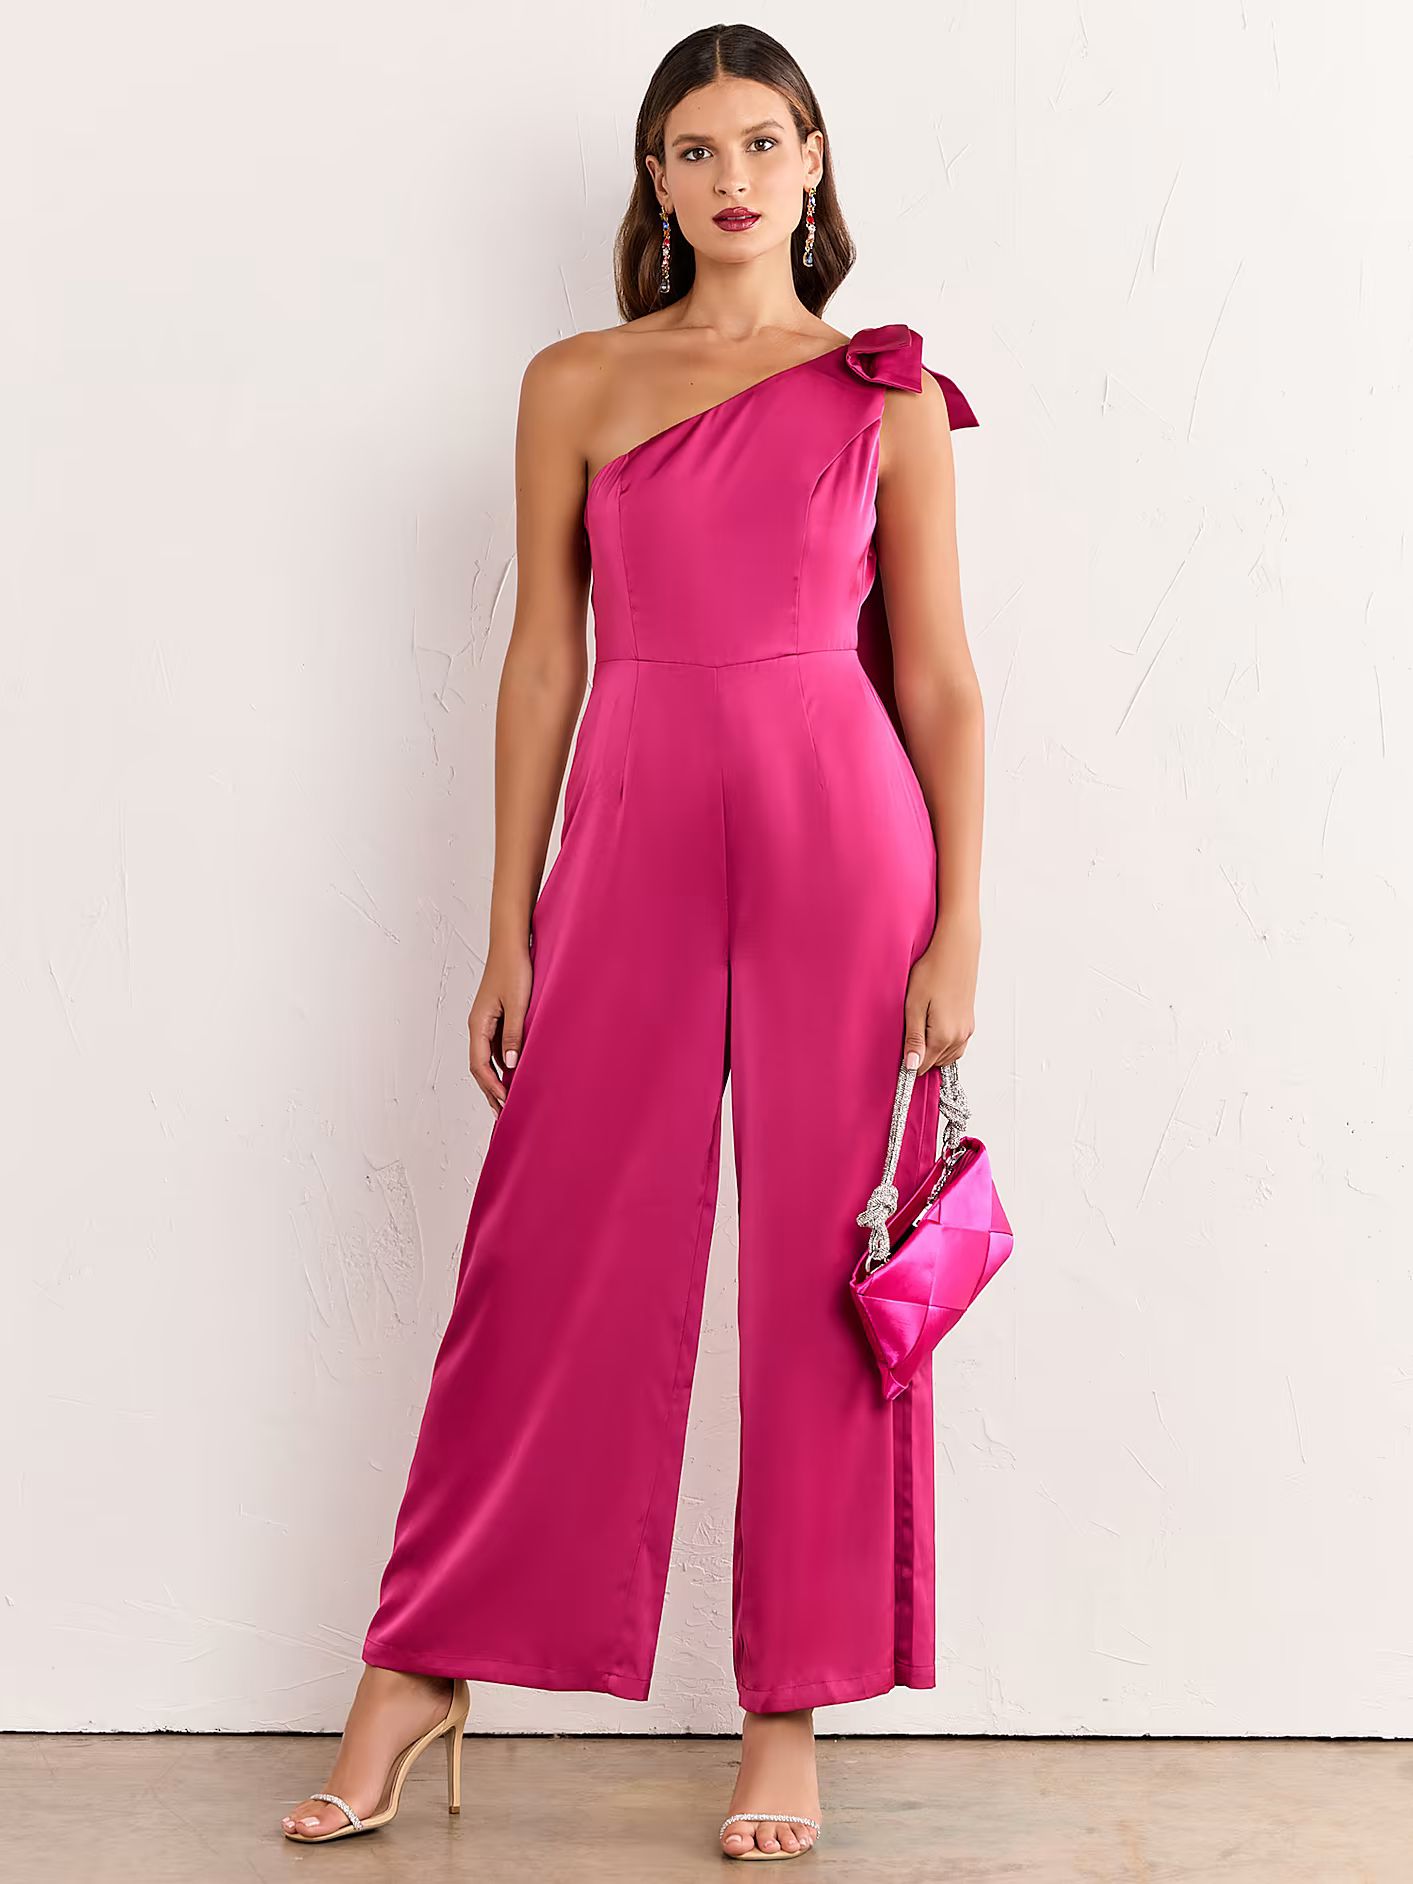 One-Shoulder Bow Wide Leg Jumpsuit - Lena - New York & Company | New York & Company